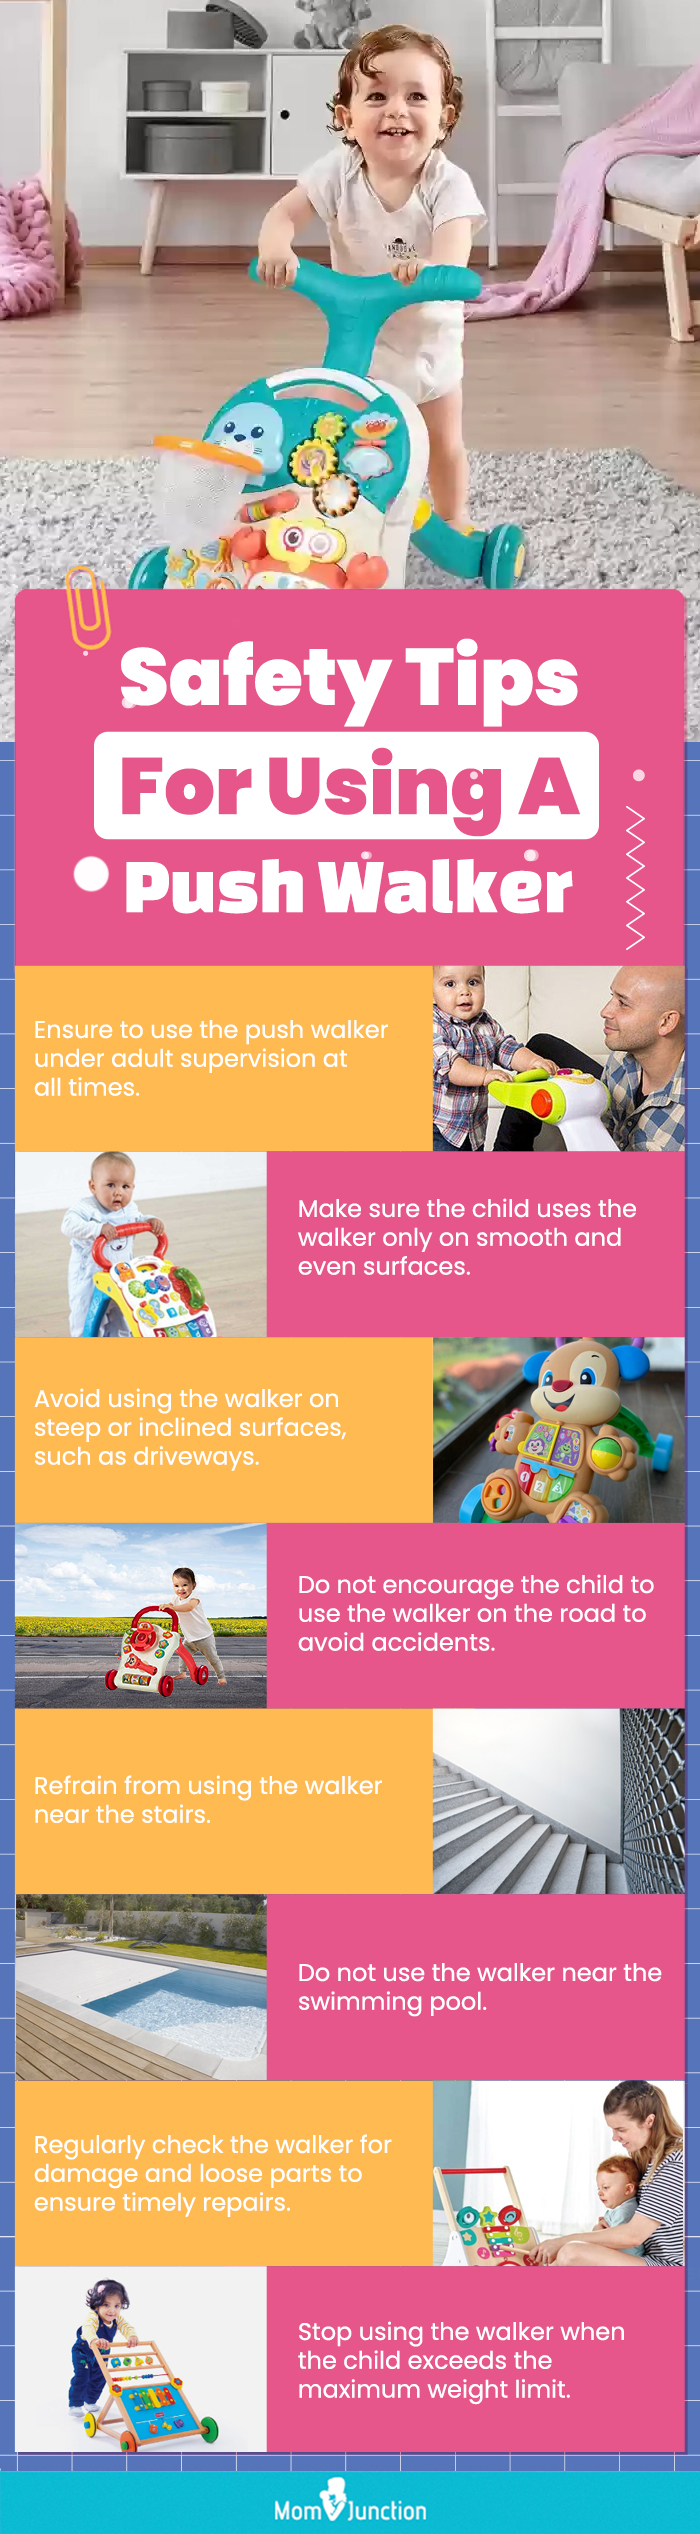 Safety Tips For Using A Push Walker (infographic)